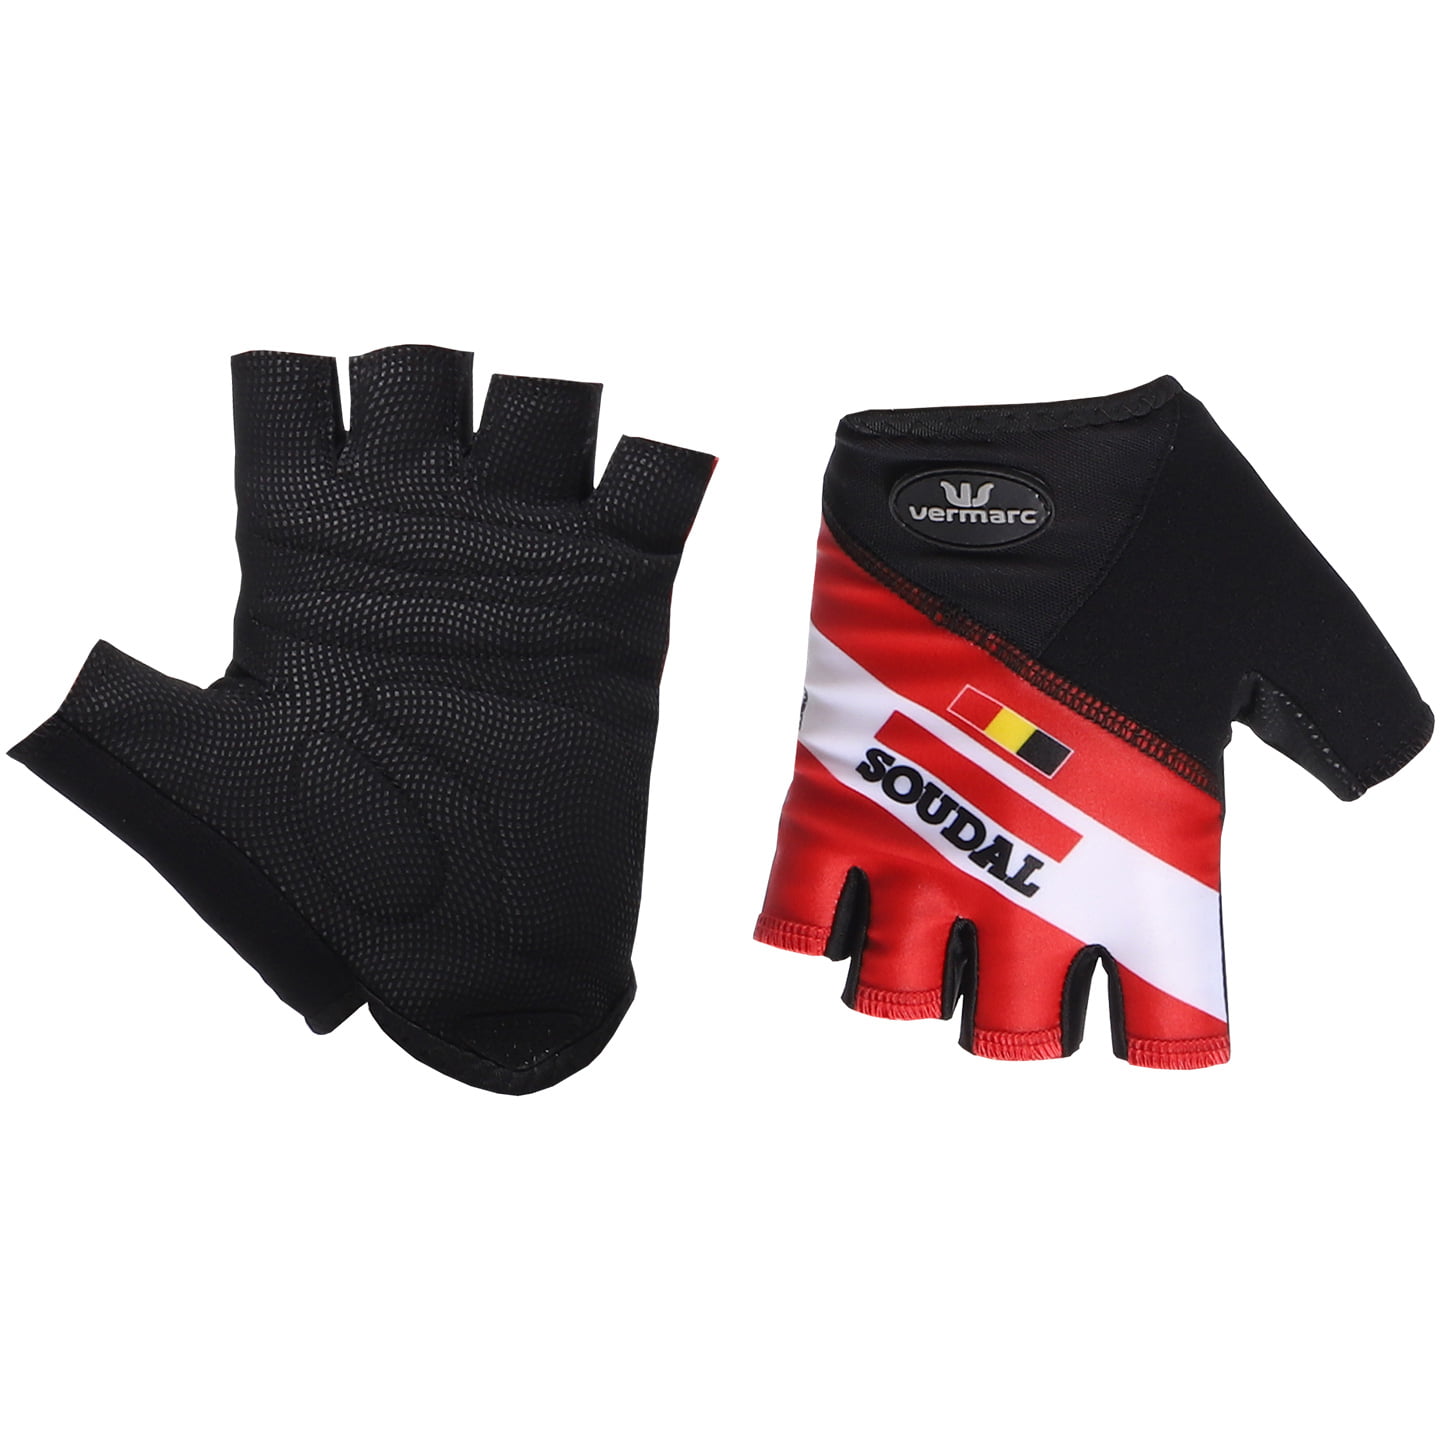 LOTTO SOUDAL WB 2022 Cycling Gloves, for men, size S, Cycling gloves, Cycling clothing